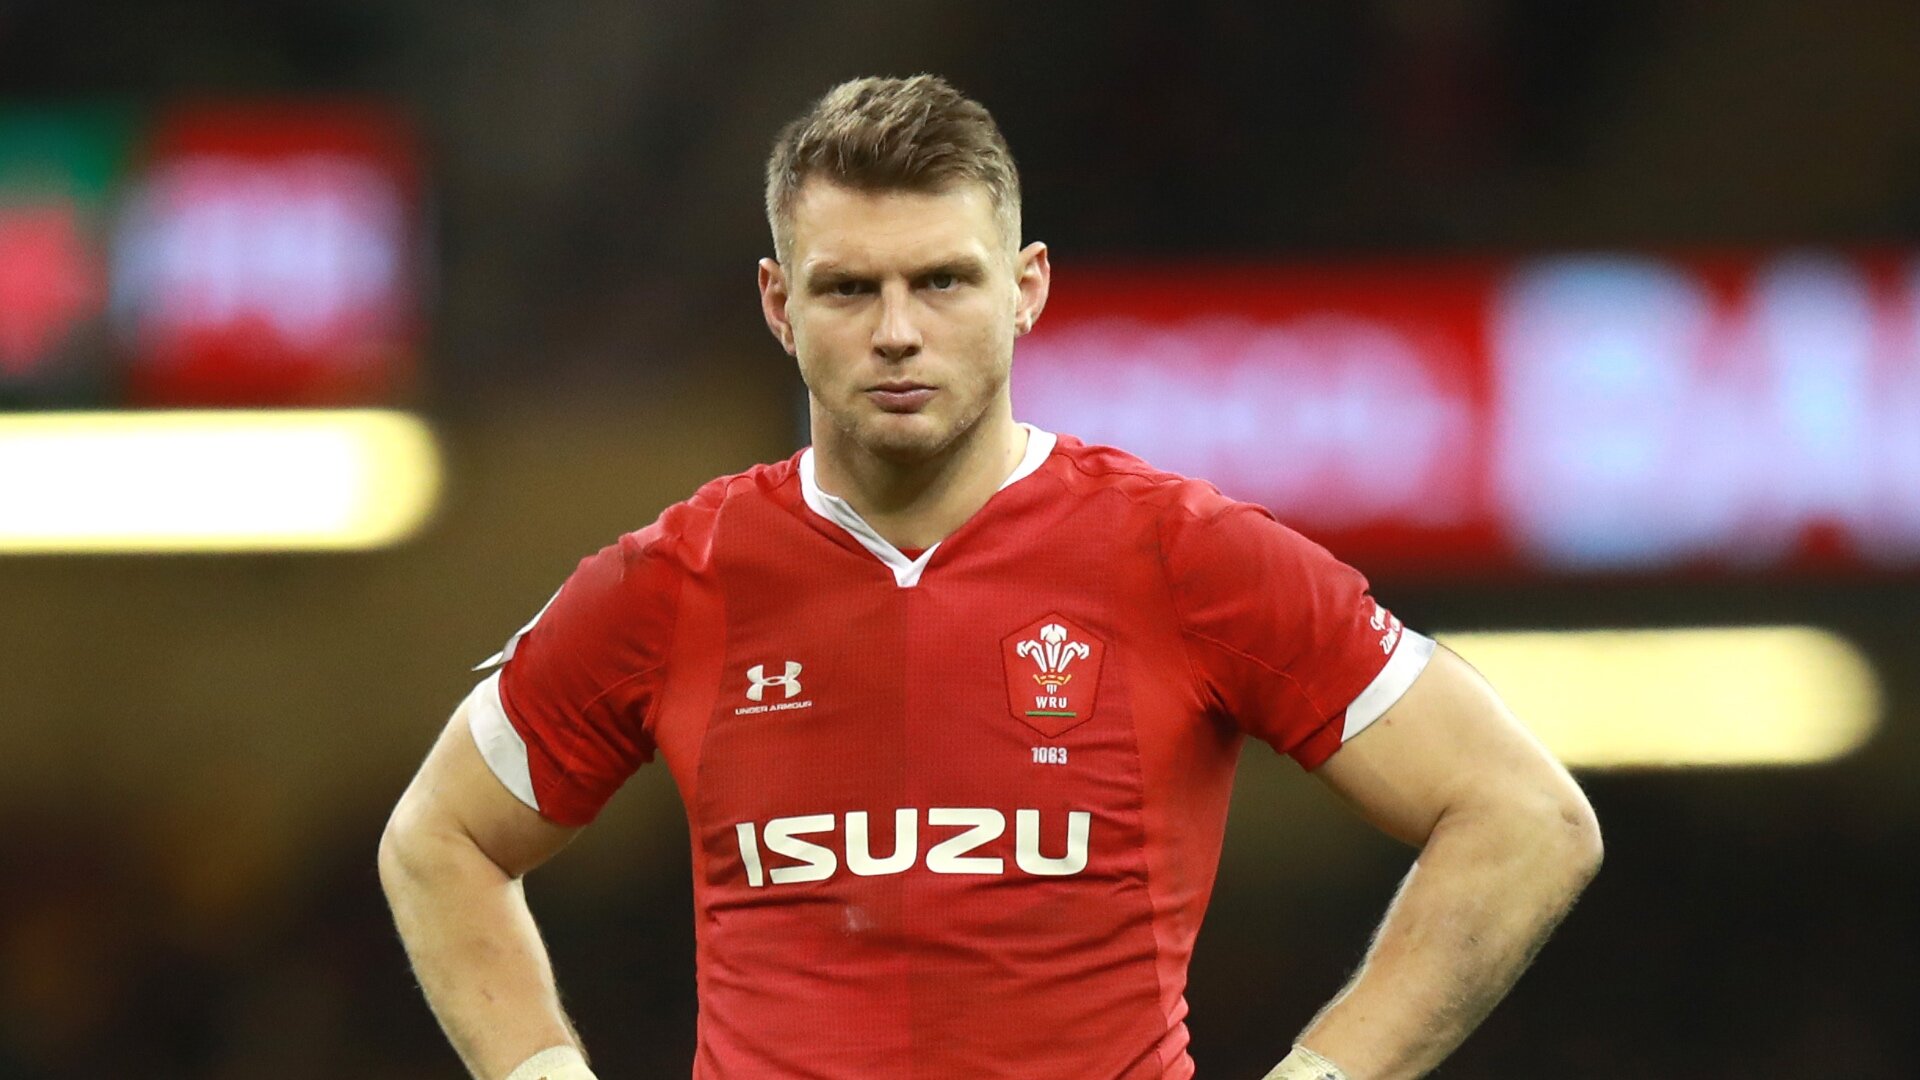 Wales name Biggar to skipper squad containing 3 uncapped players